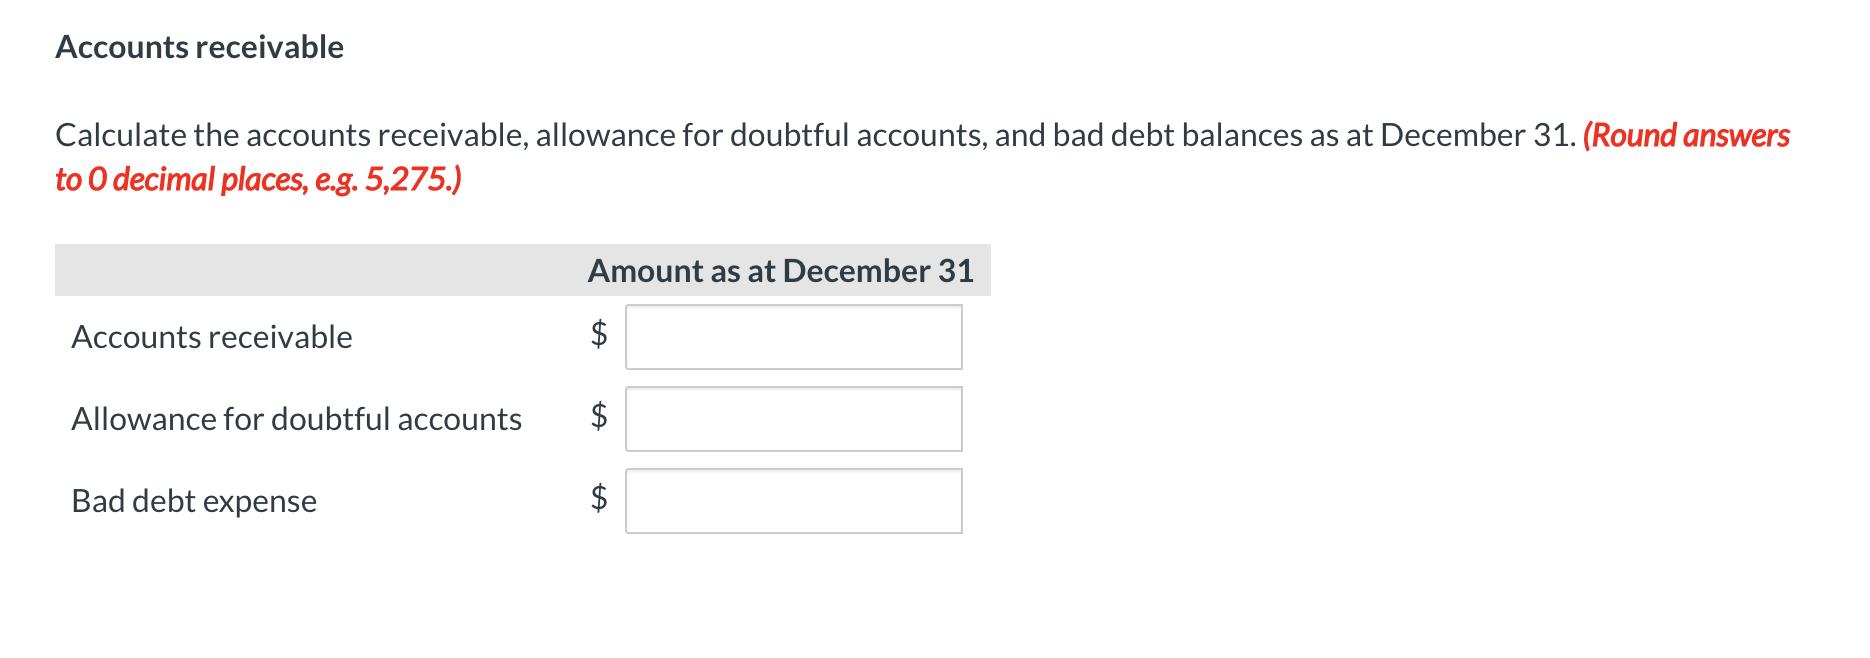 Accounts receivable Calculate the accounts receivable, allowance for doubtful accounts, and bad debt balances as at December